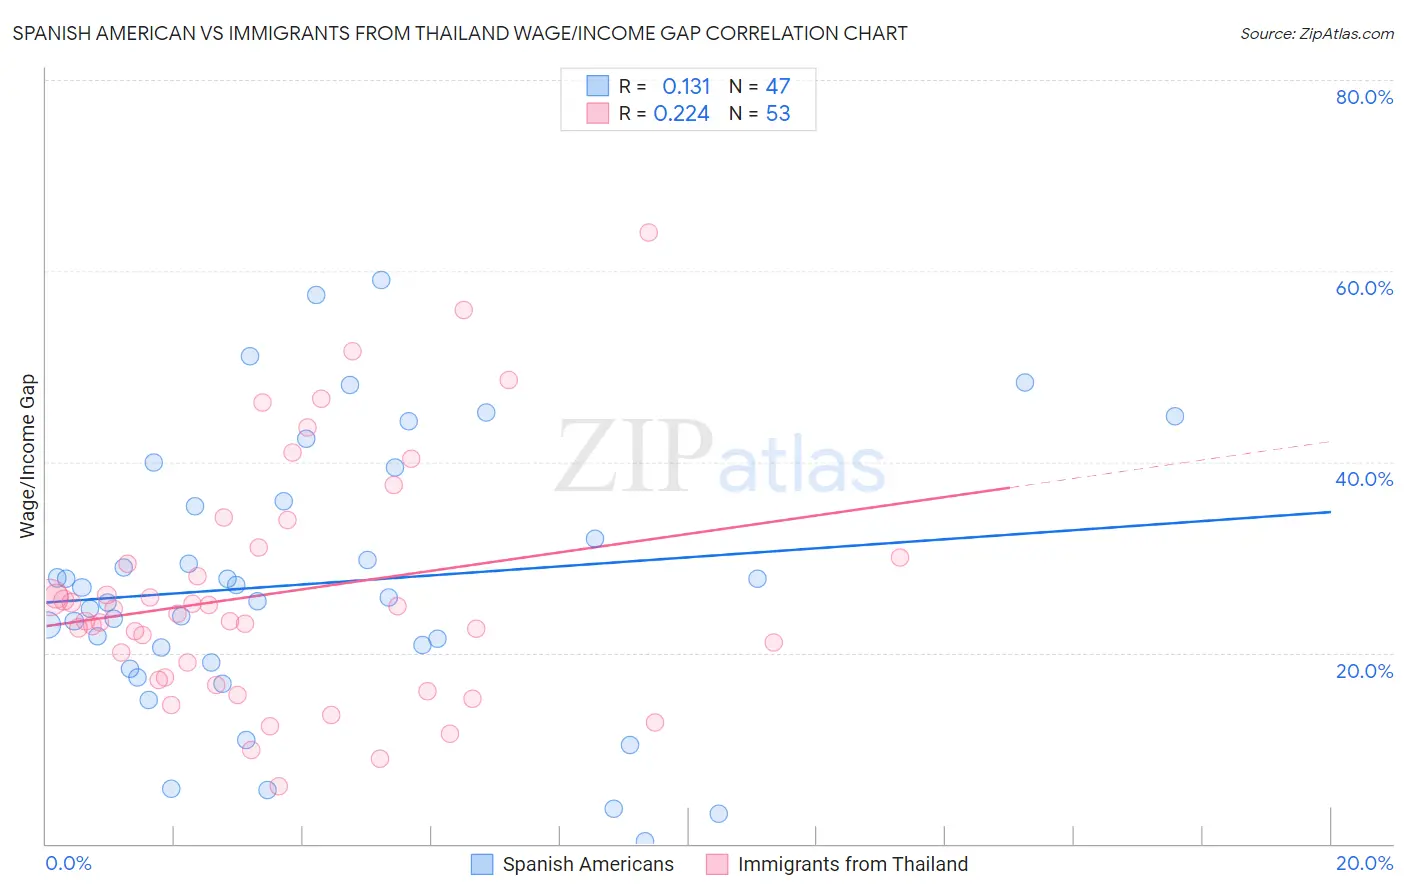 Spanish American vs Immigrants from Thailand Wage/Income Gap